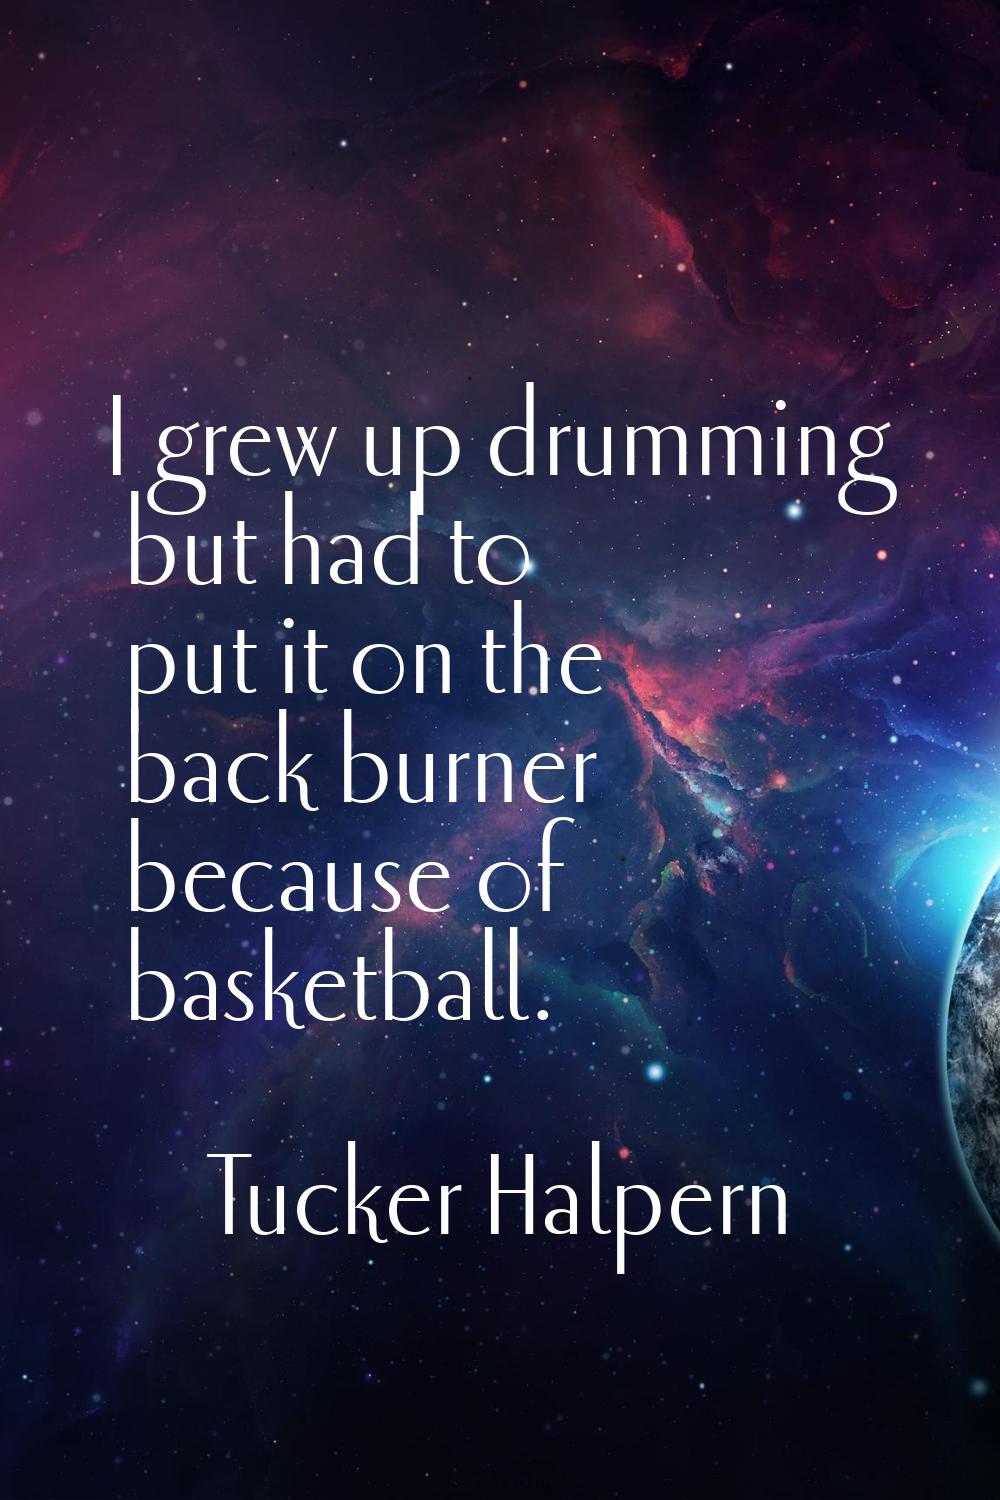 I grew up drumming but had to put it on the back burner because of basketball.